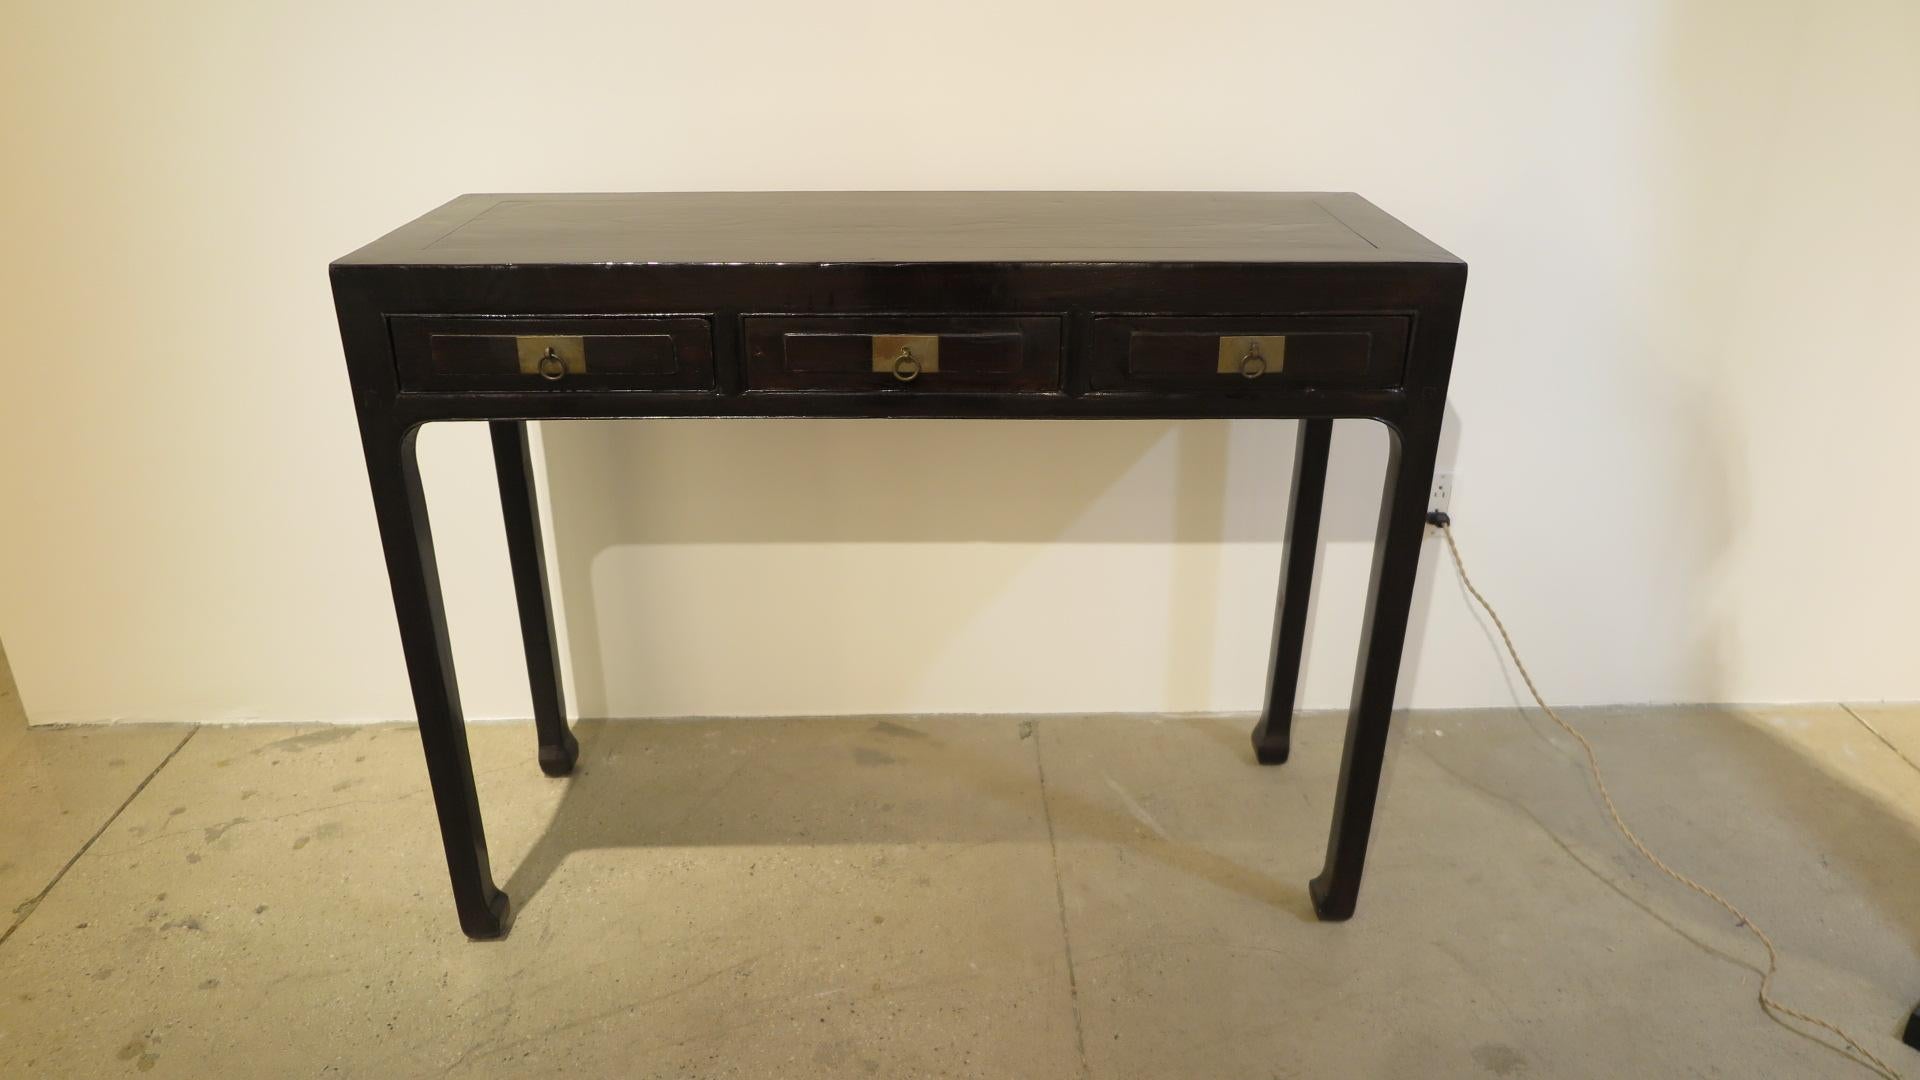 19th century Chinese console table. Three drawer thin console table elegant refined lines with ring pull handles. Detailed arch apron top of legs tapering to horse hoof feet. Very good condition commensurate with age and use. Please see pictures.